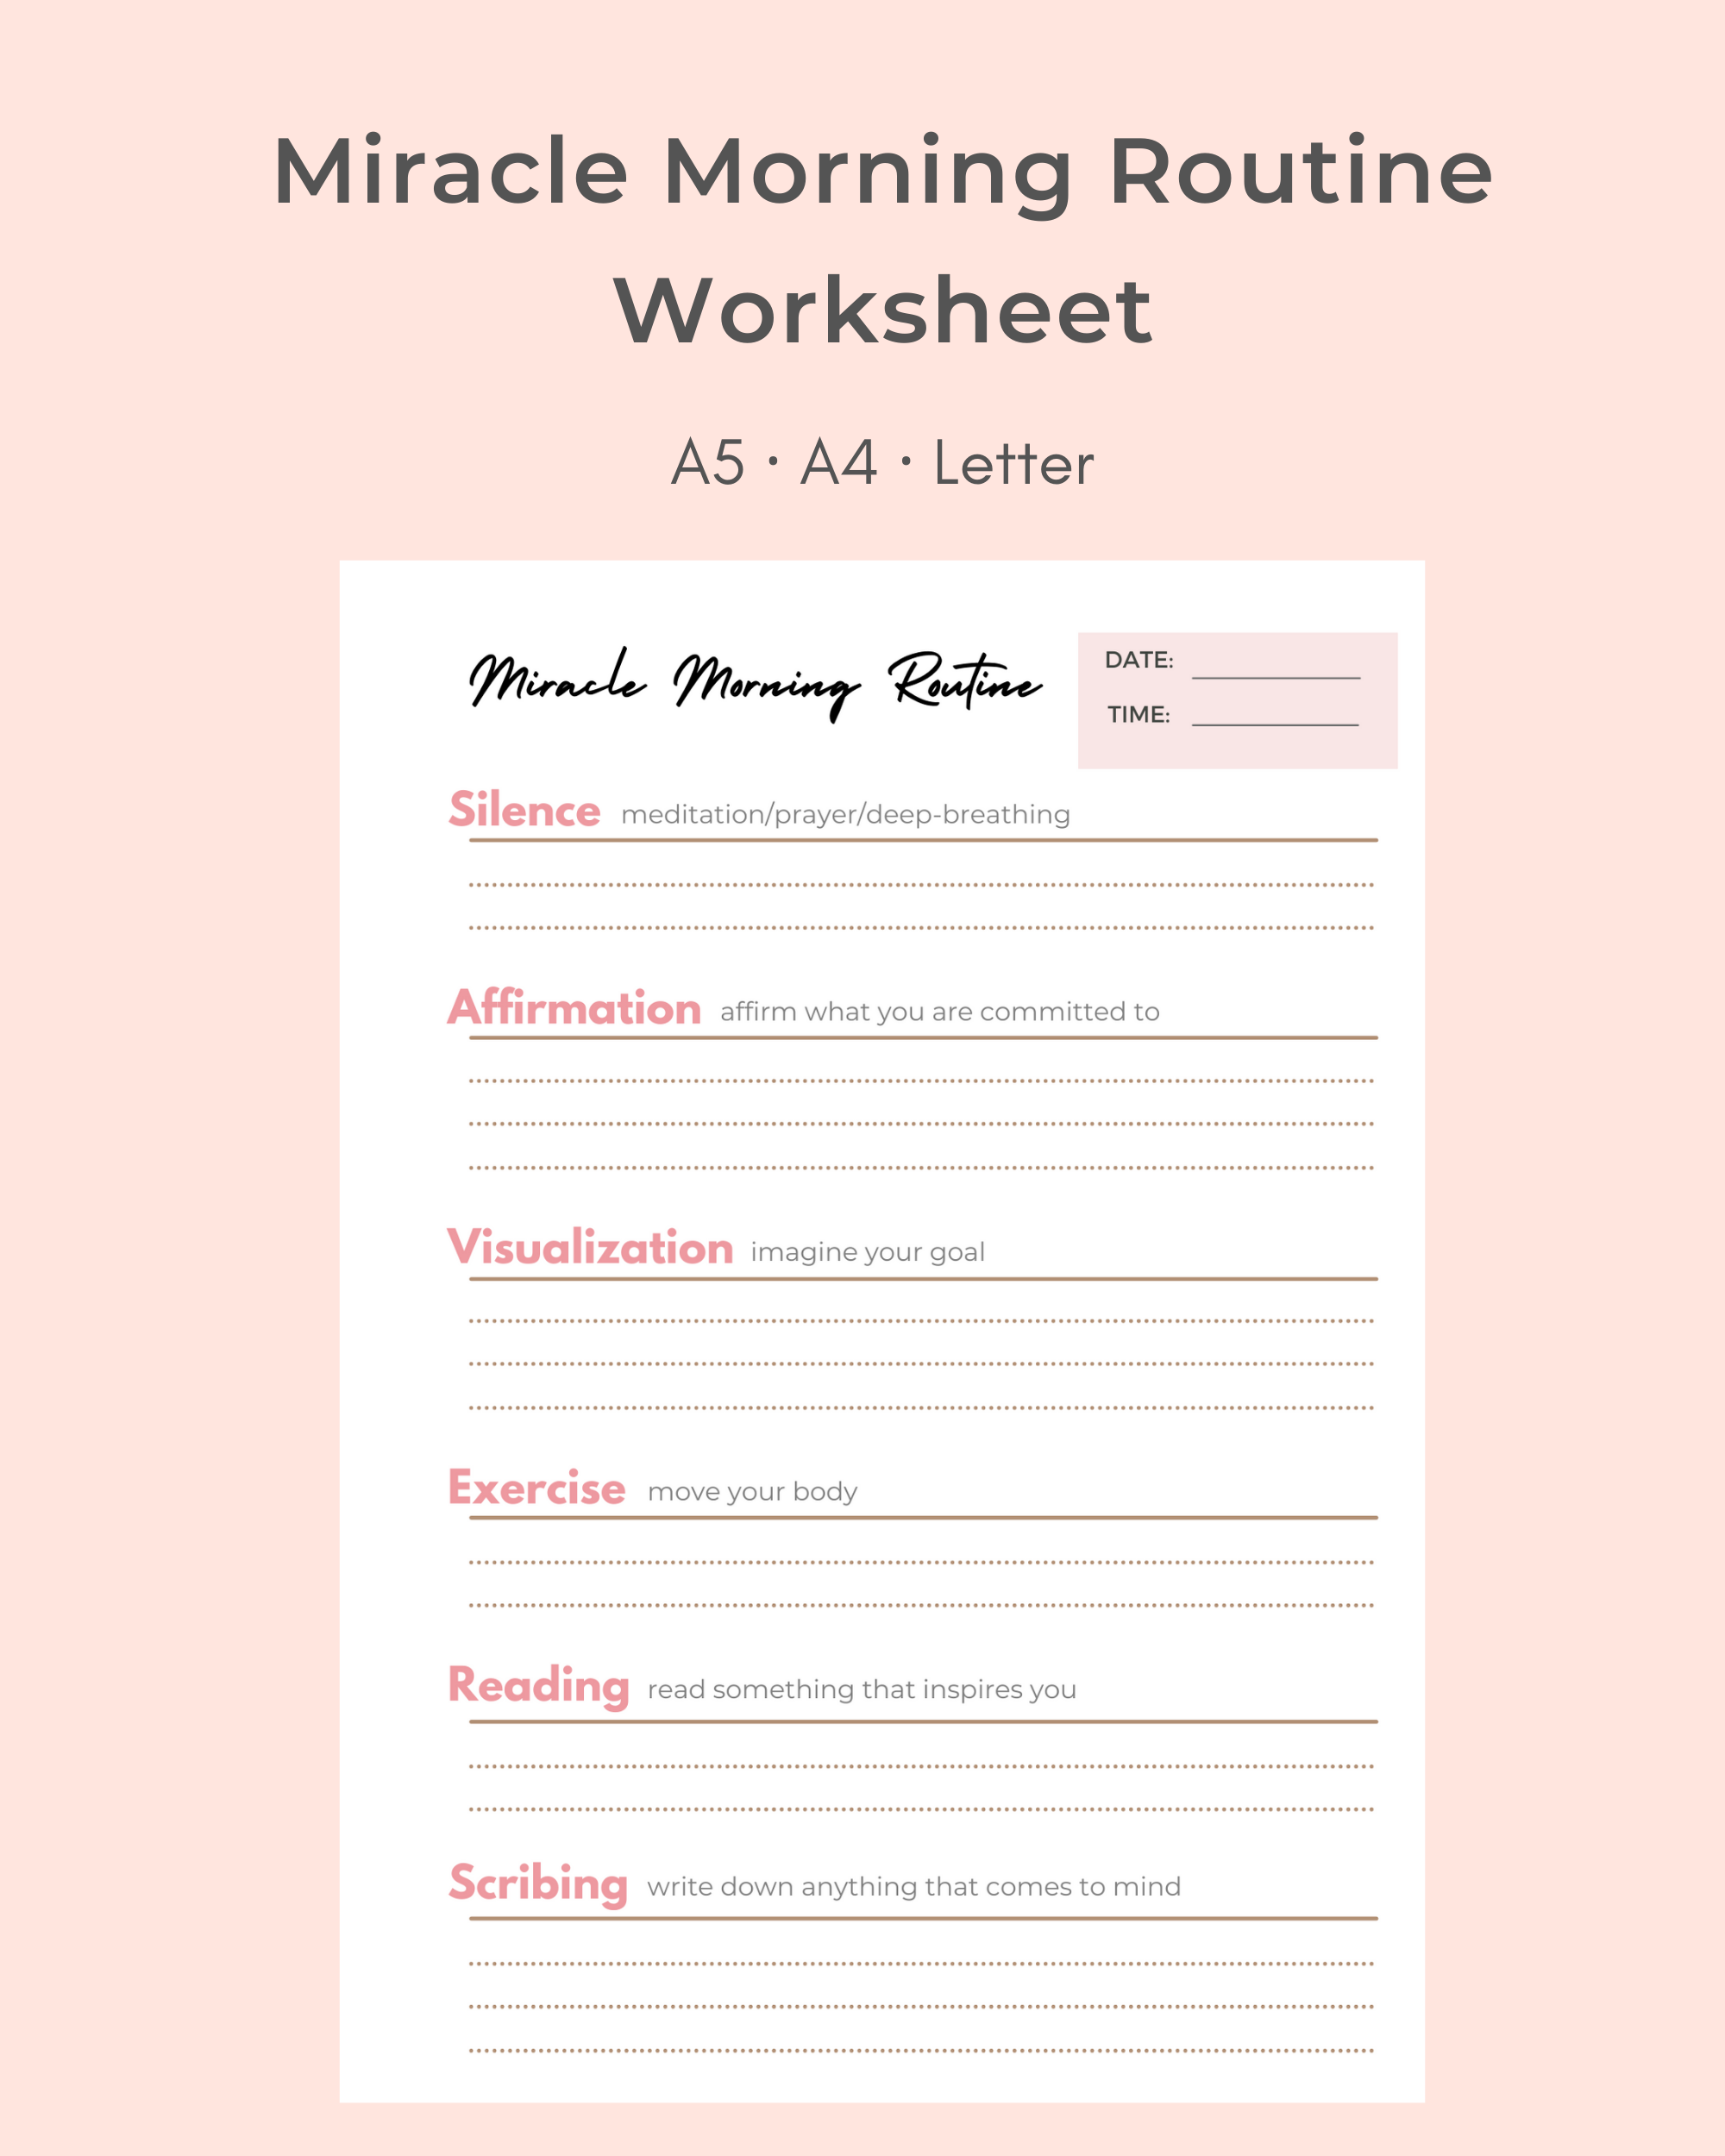 Miracle Morning Routine Worksheet Printable Editable S a v e r s Pdf Miracle Morning Journal